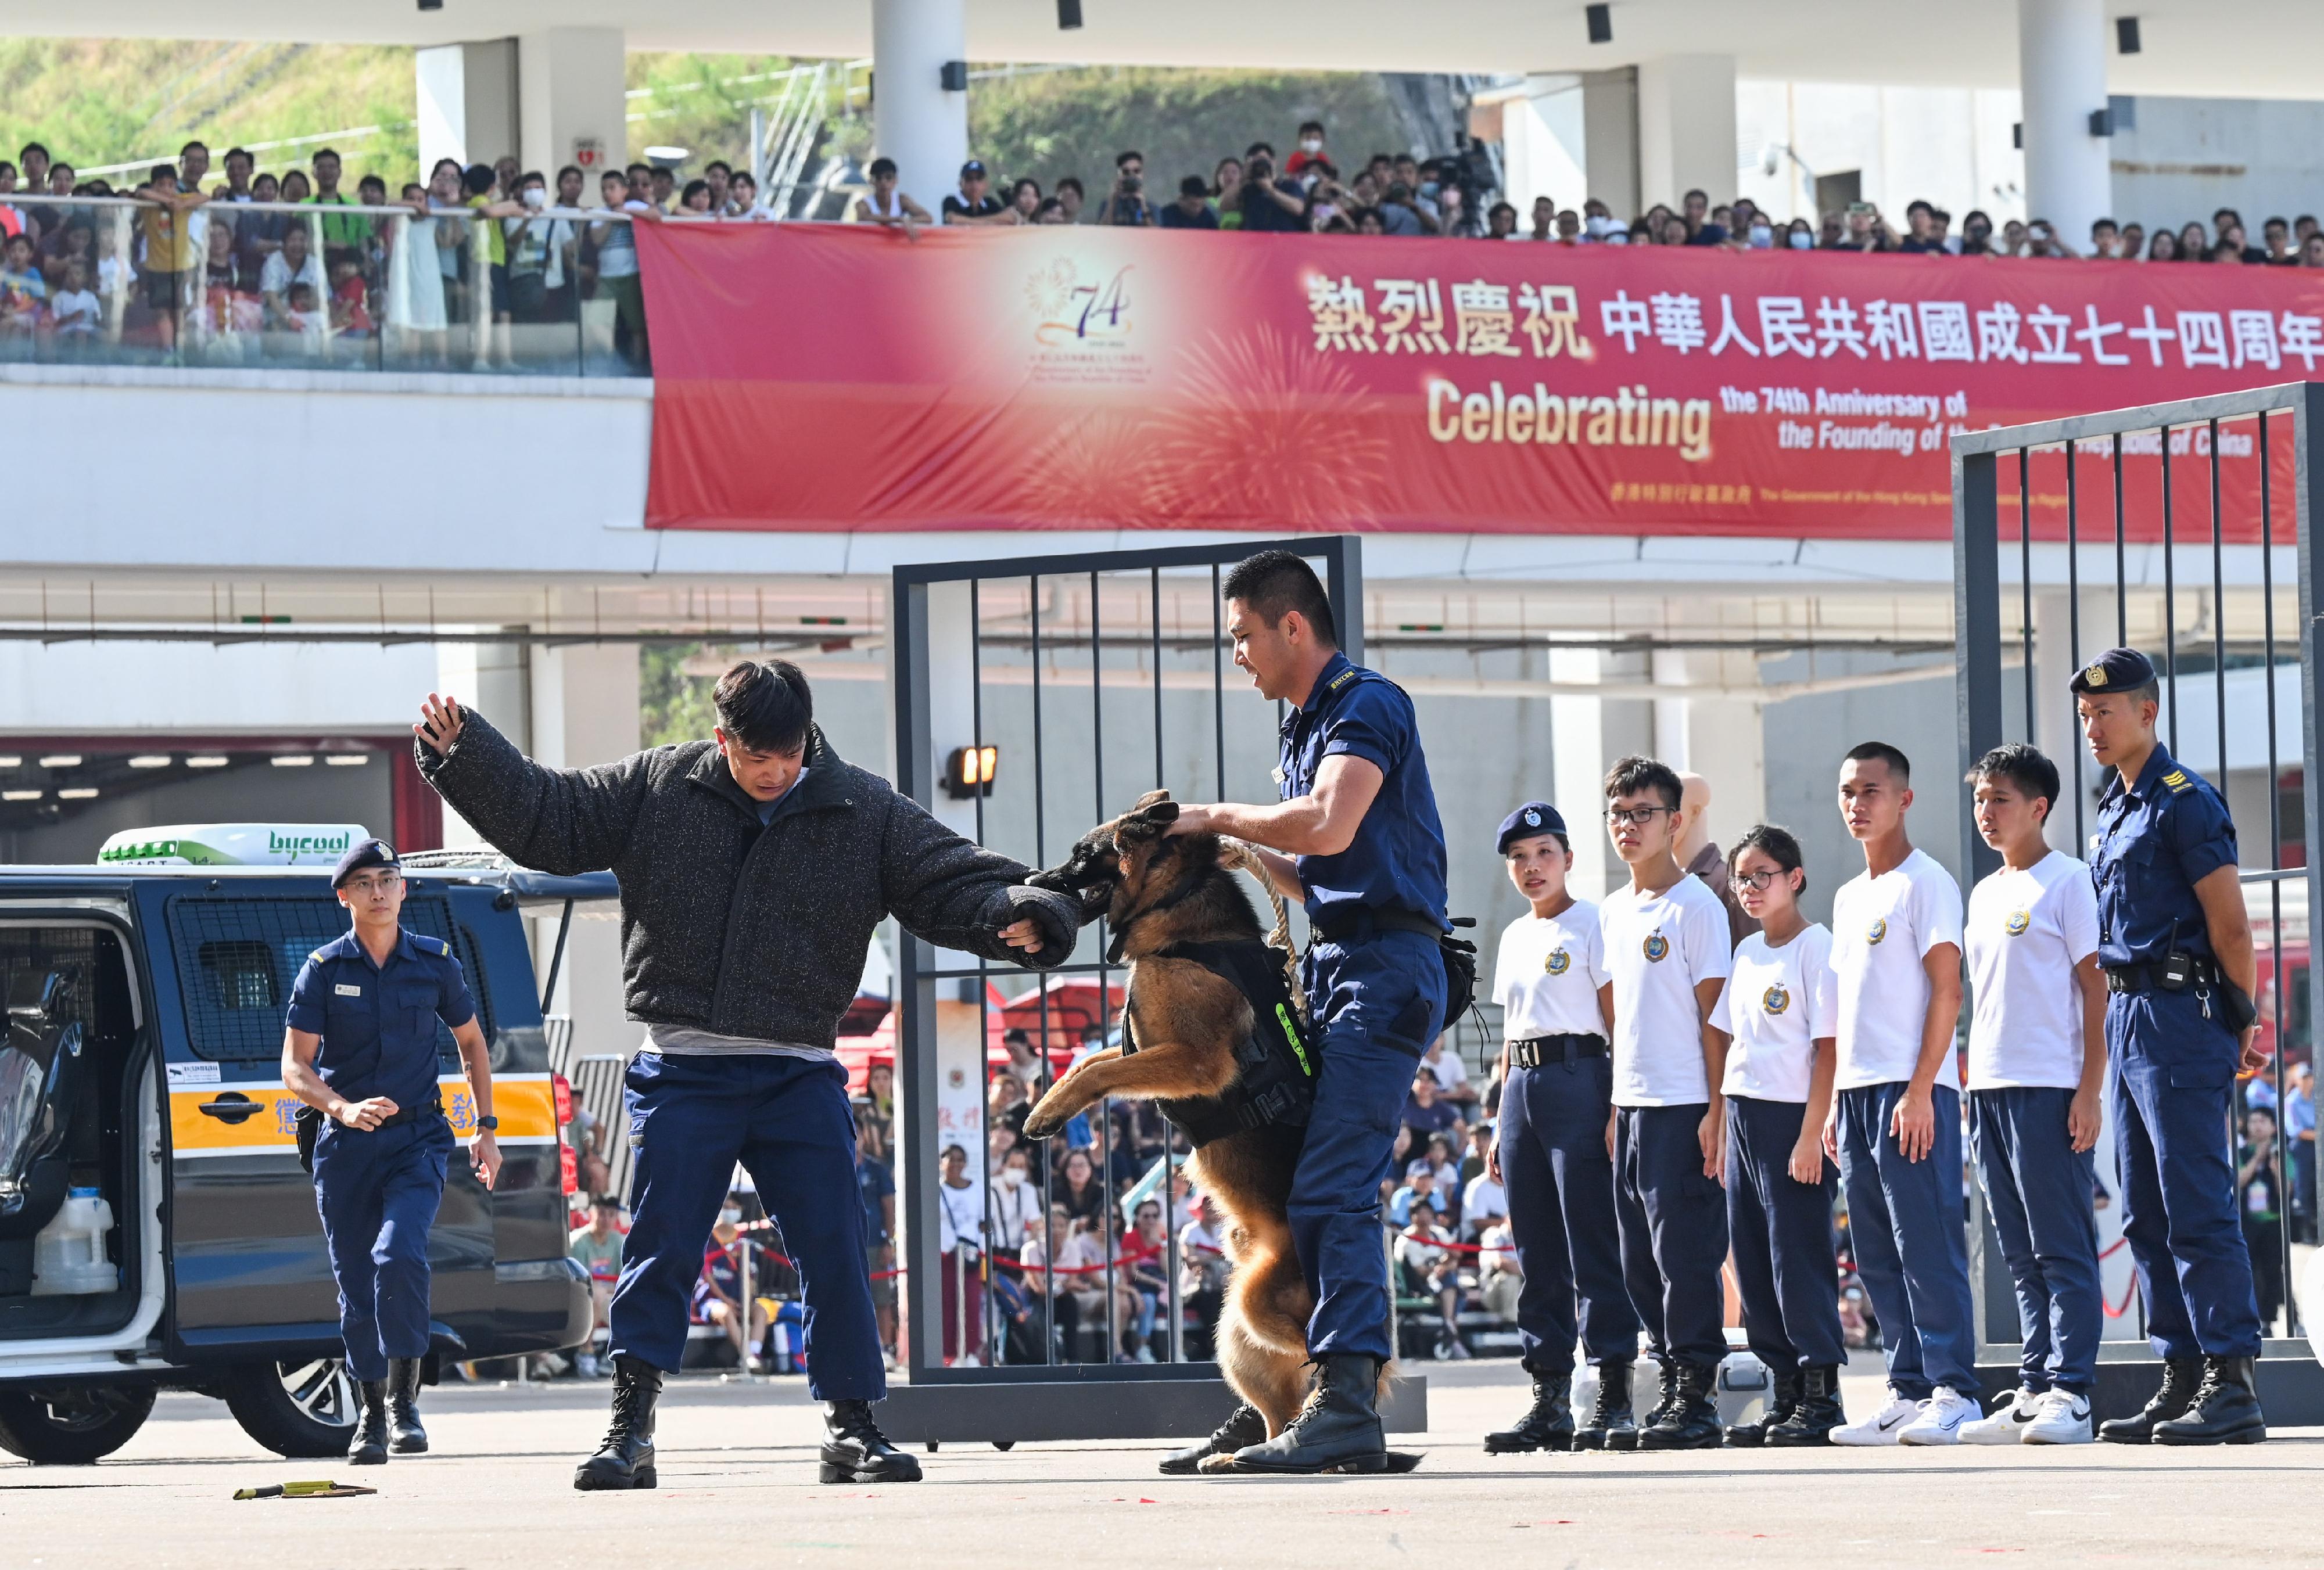 The Security Bureau led its disciplined services and auxiliary services, together with youth uniformed groups, to hold the Parade by Disciplined Services and Youth Groups cum Carnival for Celebrating the 74th Anniversary of the Founding of the People's Republic of China at the Fire and Ambulance Services Academy in Tseung Kwan O today (October 1) to celebrate the National Day with members of the public. Photo shows a joint work and rescue departmental drill by various disciplined services and auxiliary services.